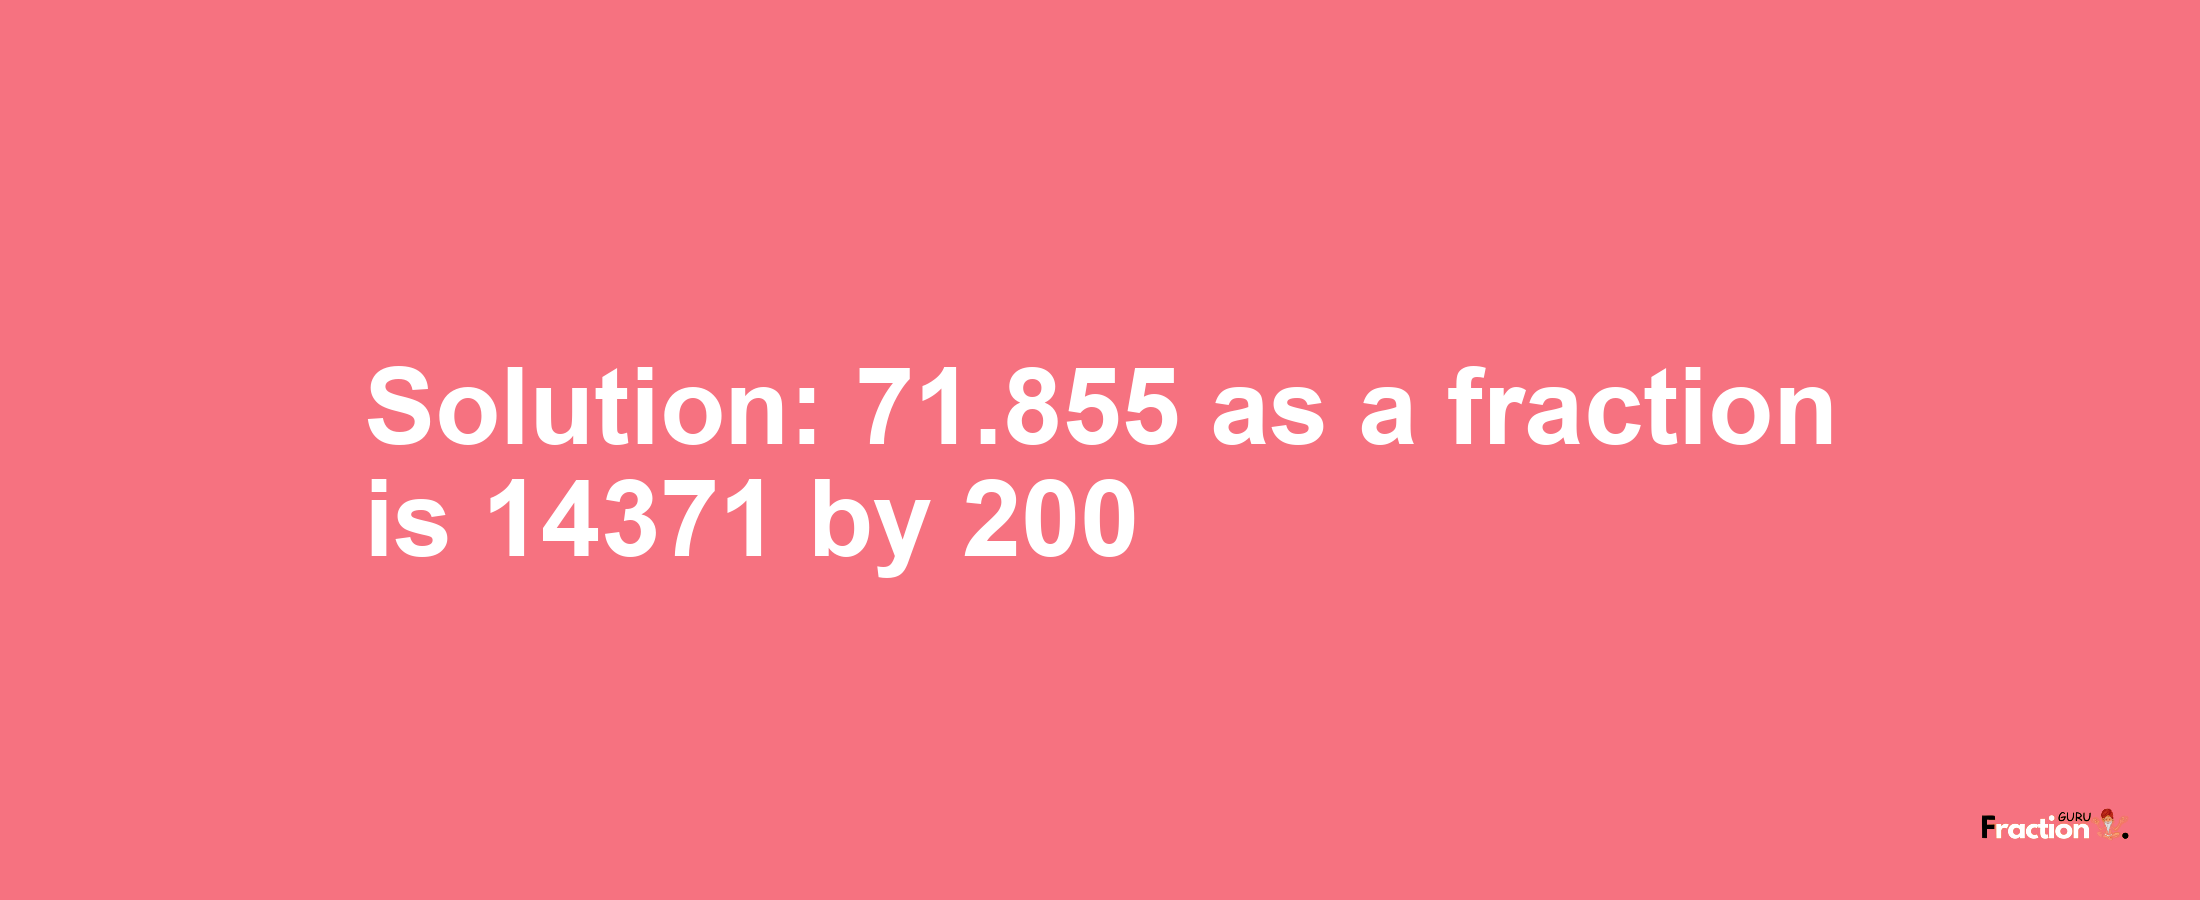 Solution:71.855 as a fraction is 14371/200